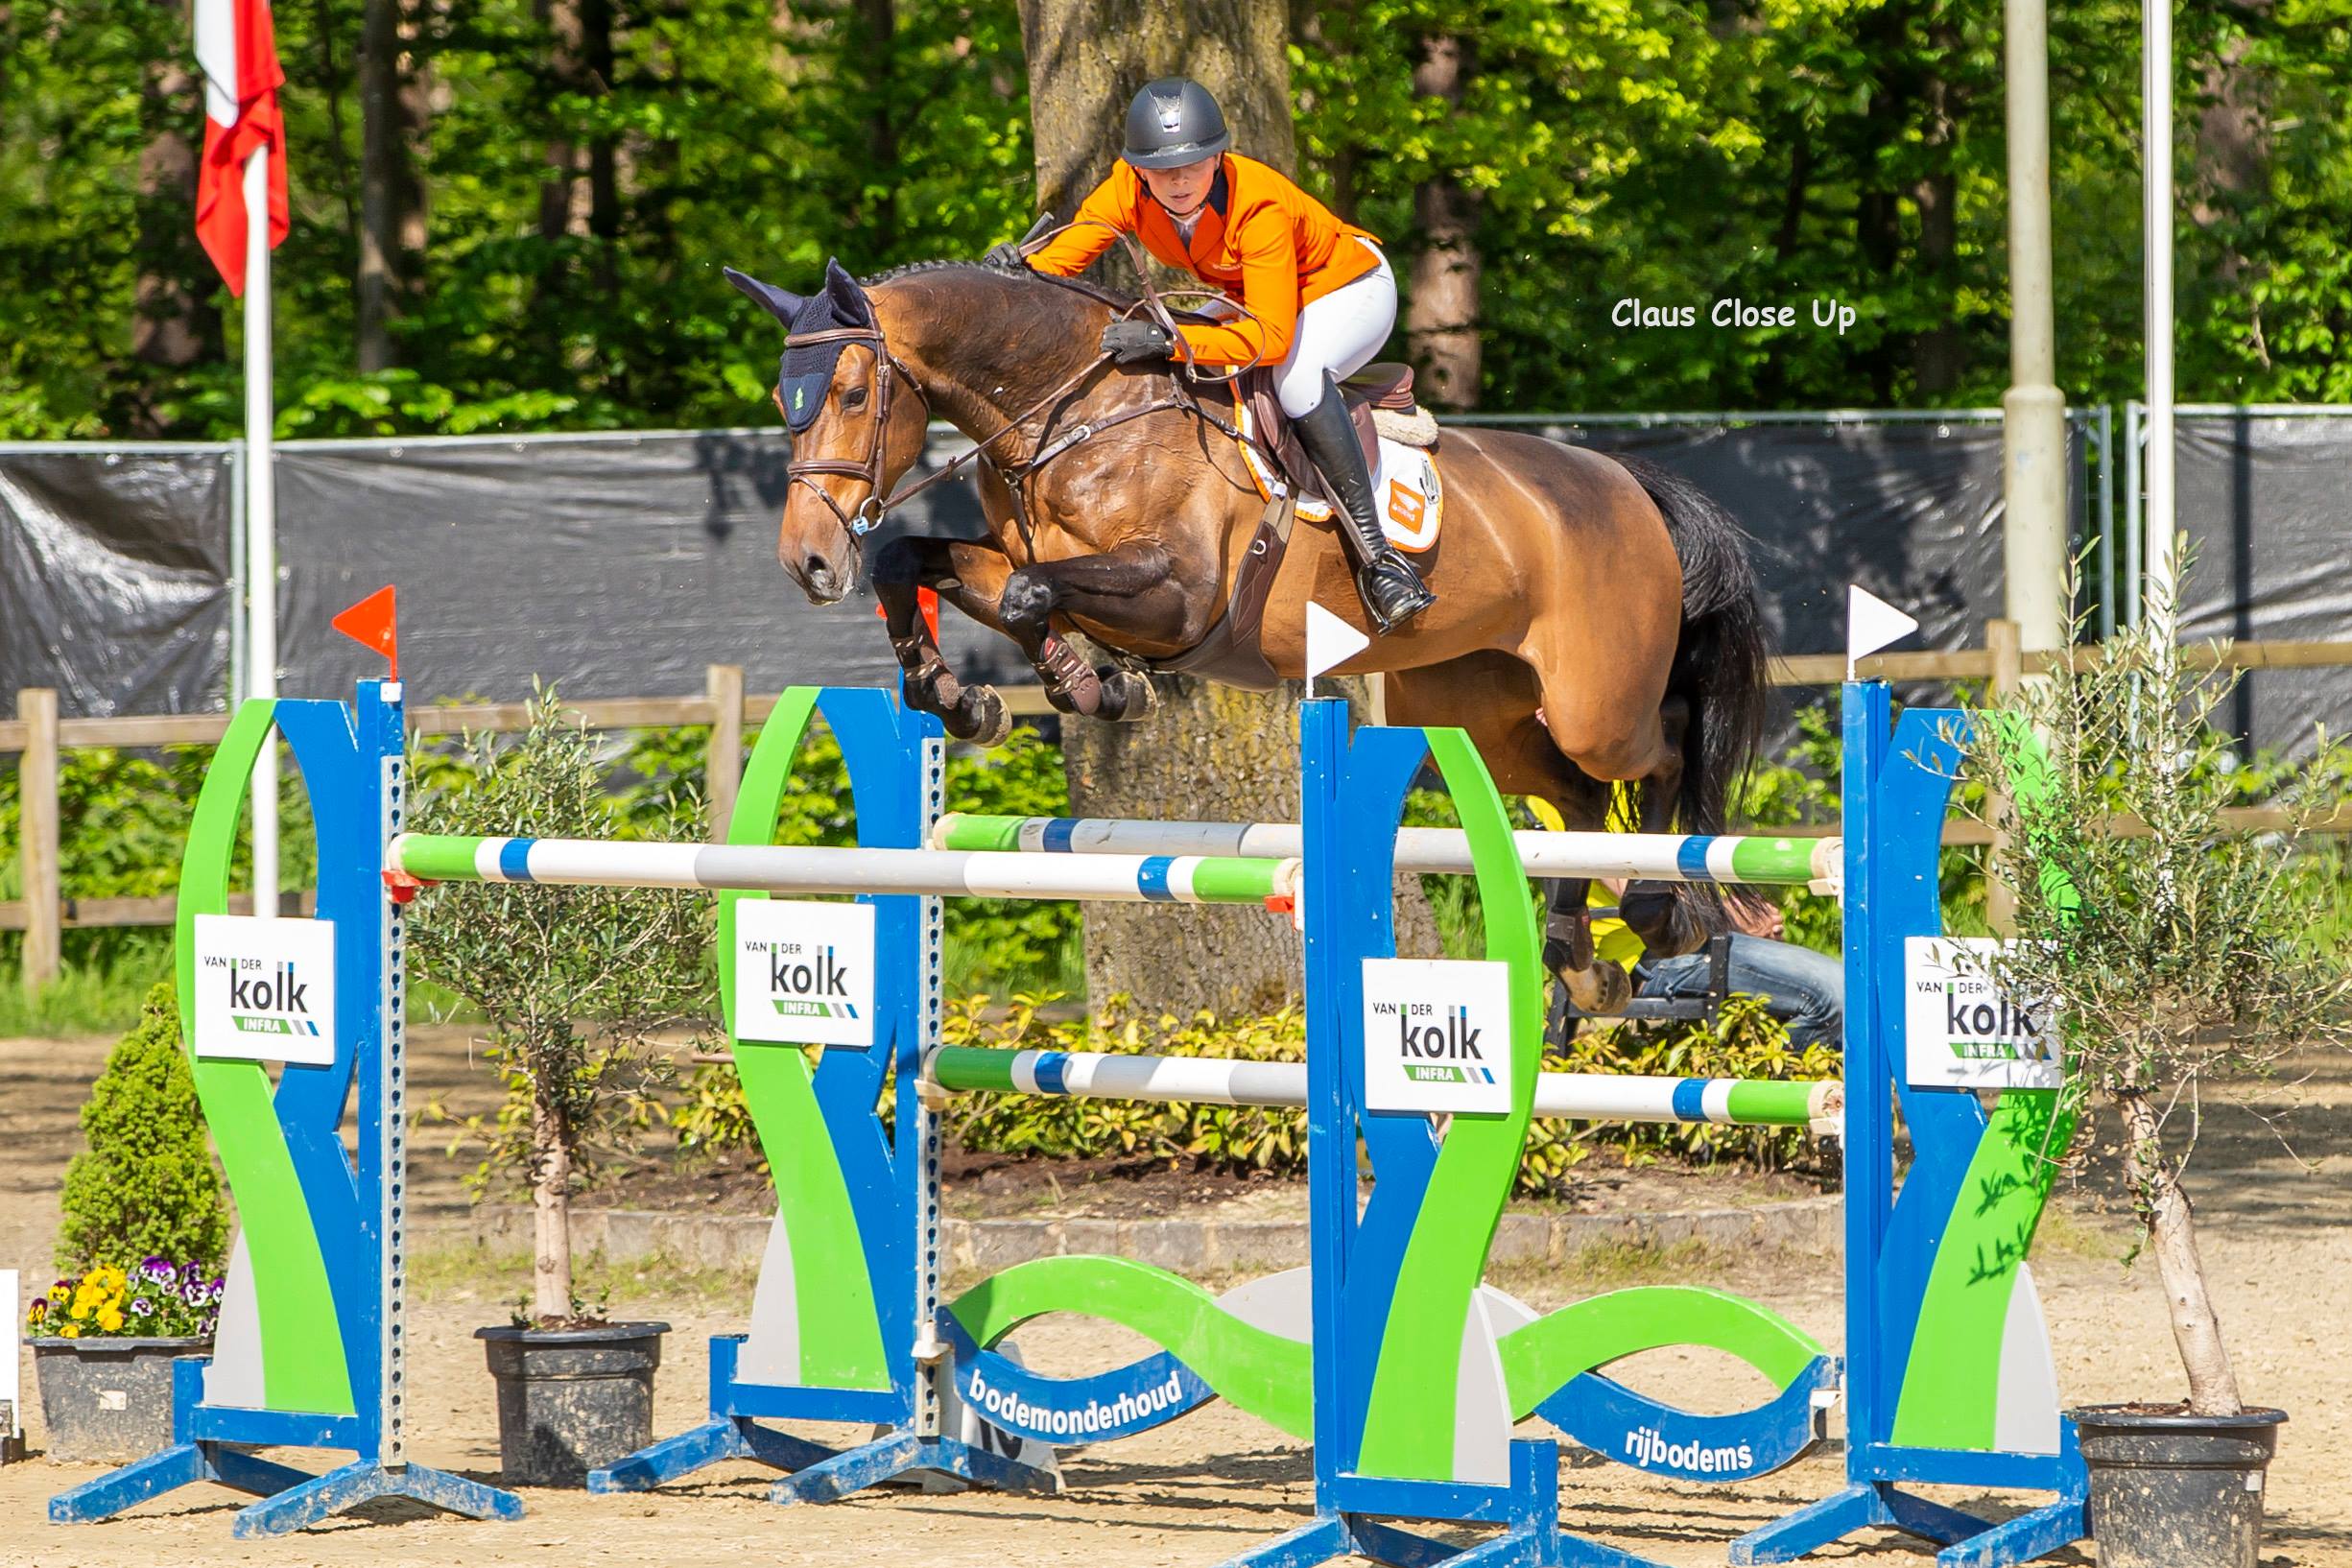 Young Dutch power stays ahead of experience in main CSI3* Gorla Minore